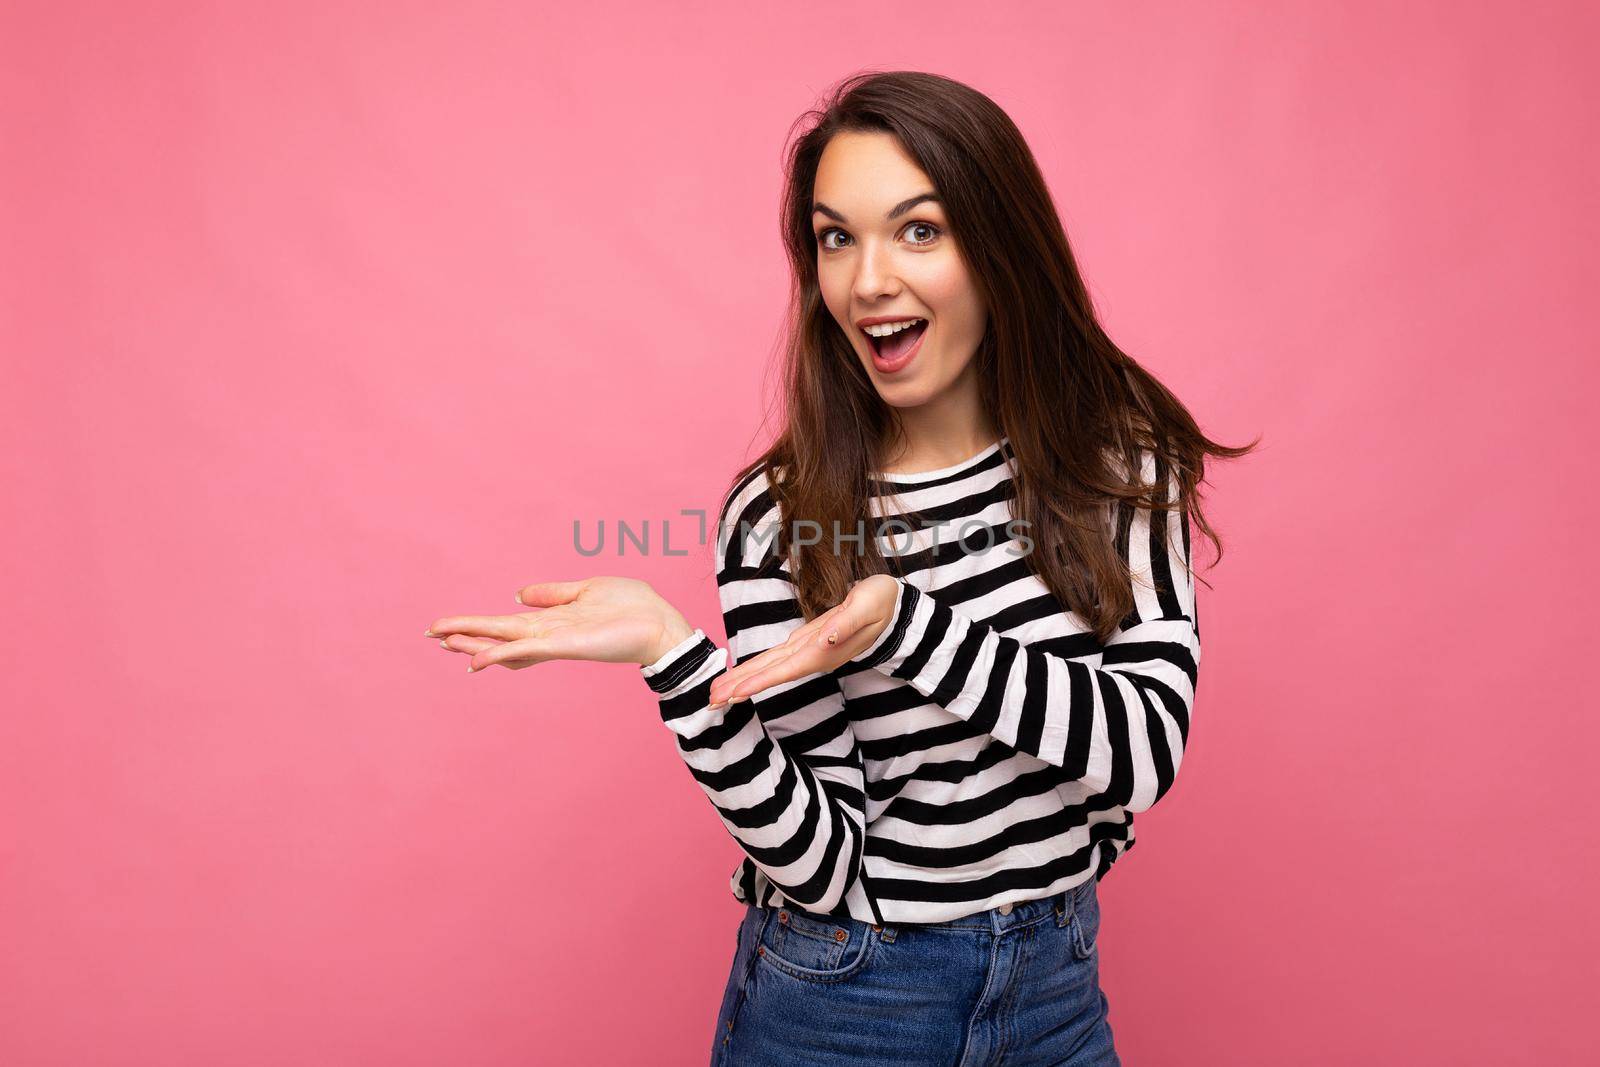 Portrait photo of young happy positive beautiful brunette woman with sincere emotions wearing casual striped pullover isolated on pink background with copy space and pointing hands at free space for text.